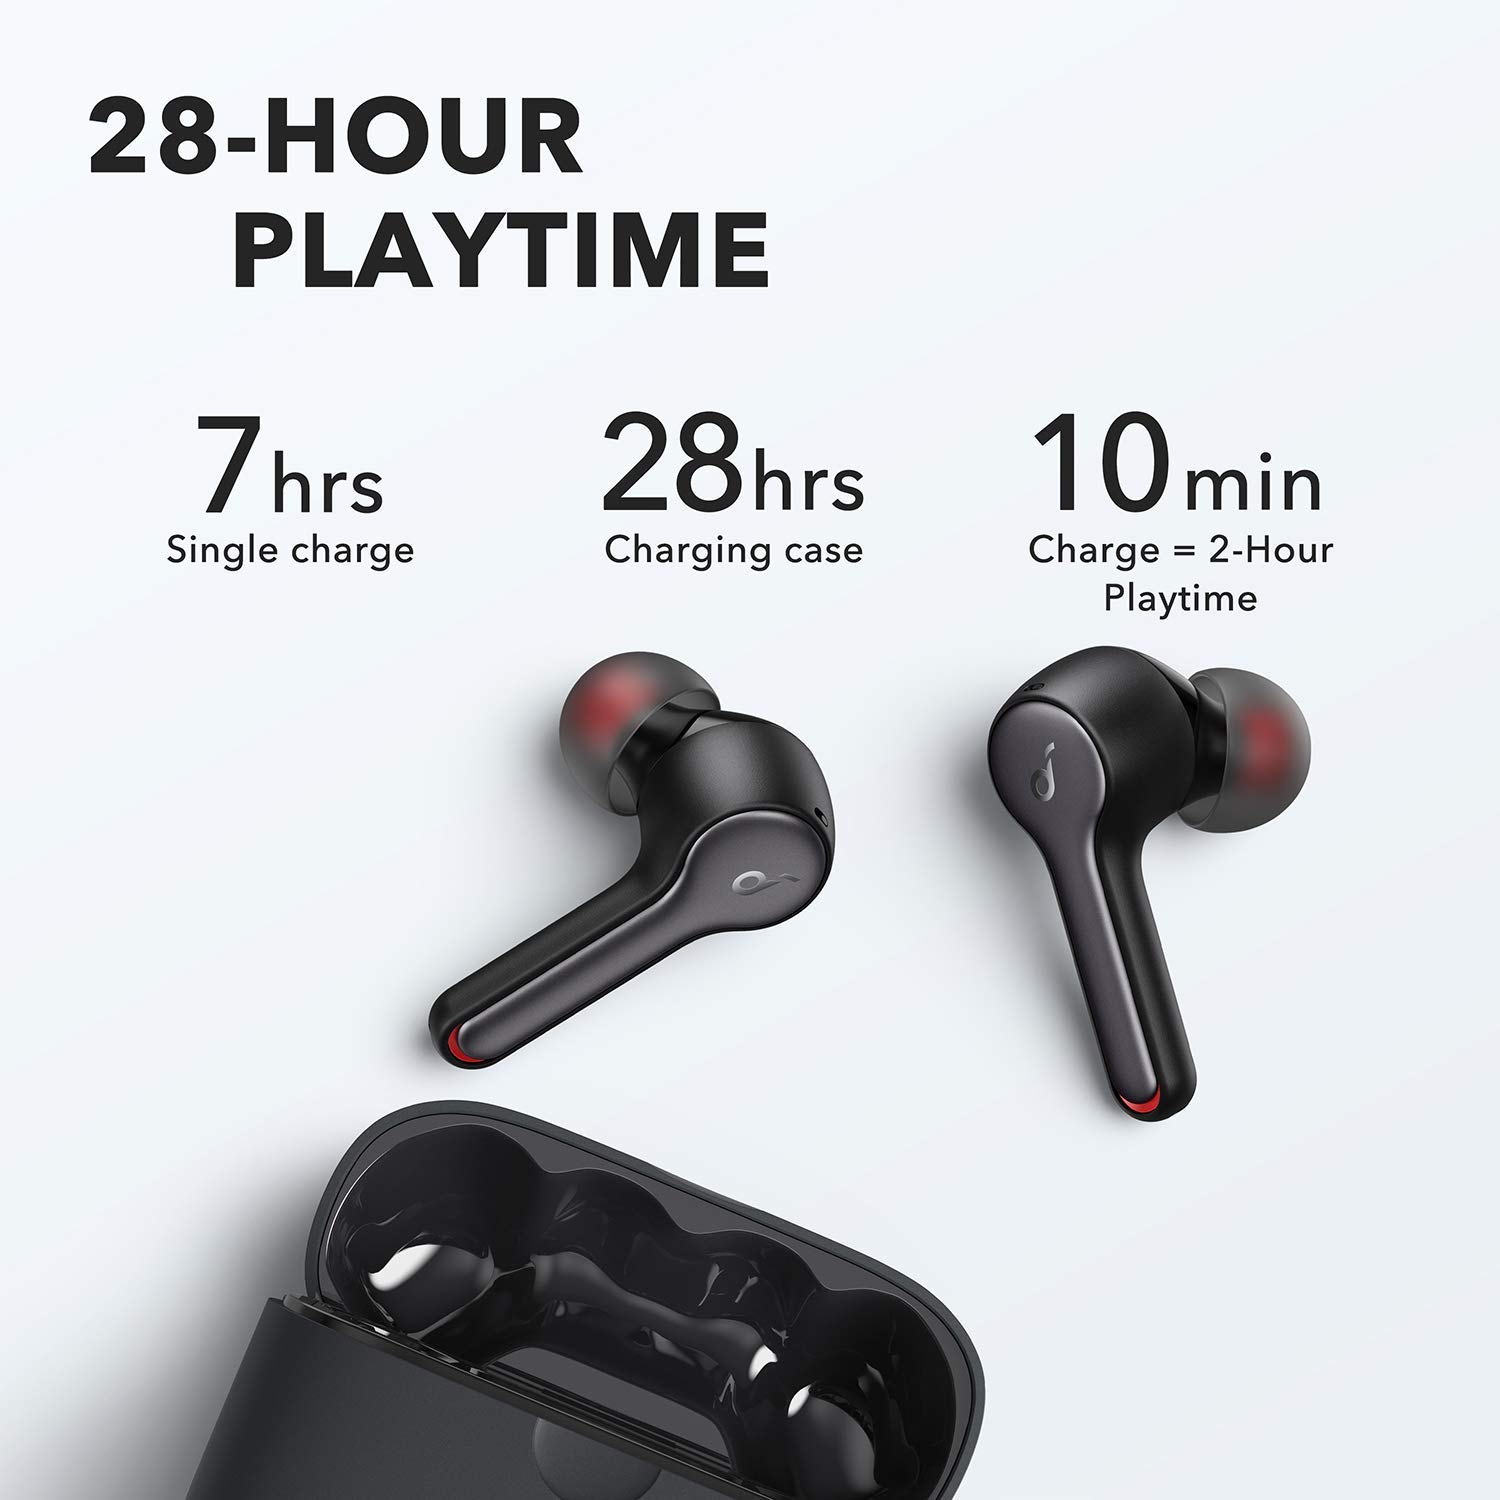 Anker Soundcore Liberty Air 2 Wireless Earbuds, Diamond-Inspired Drivers, Bluetooth Earphones, 4 Mics, Noise Reduction, 28H Playtime, HearID, Bluetooth 5, Wireless Charging (Black) (Renewed)